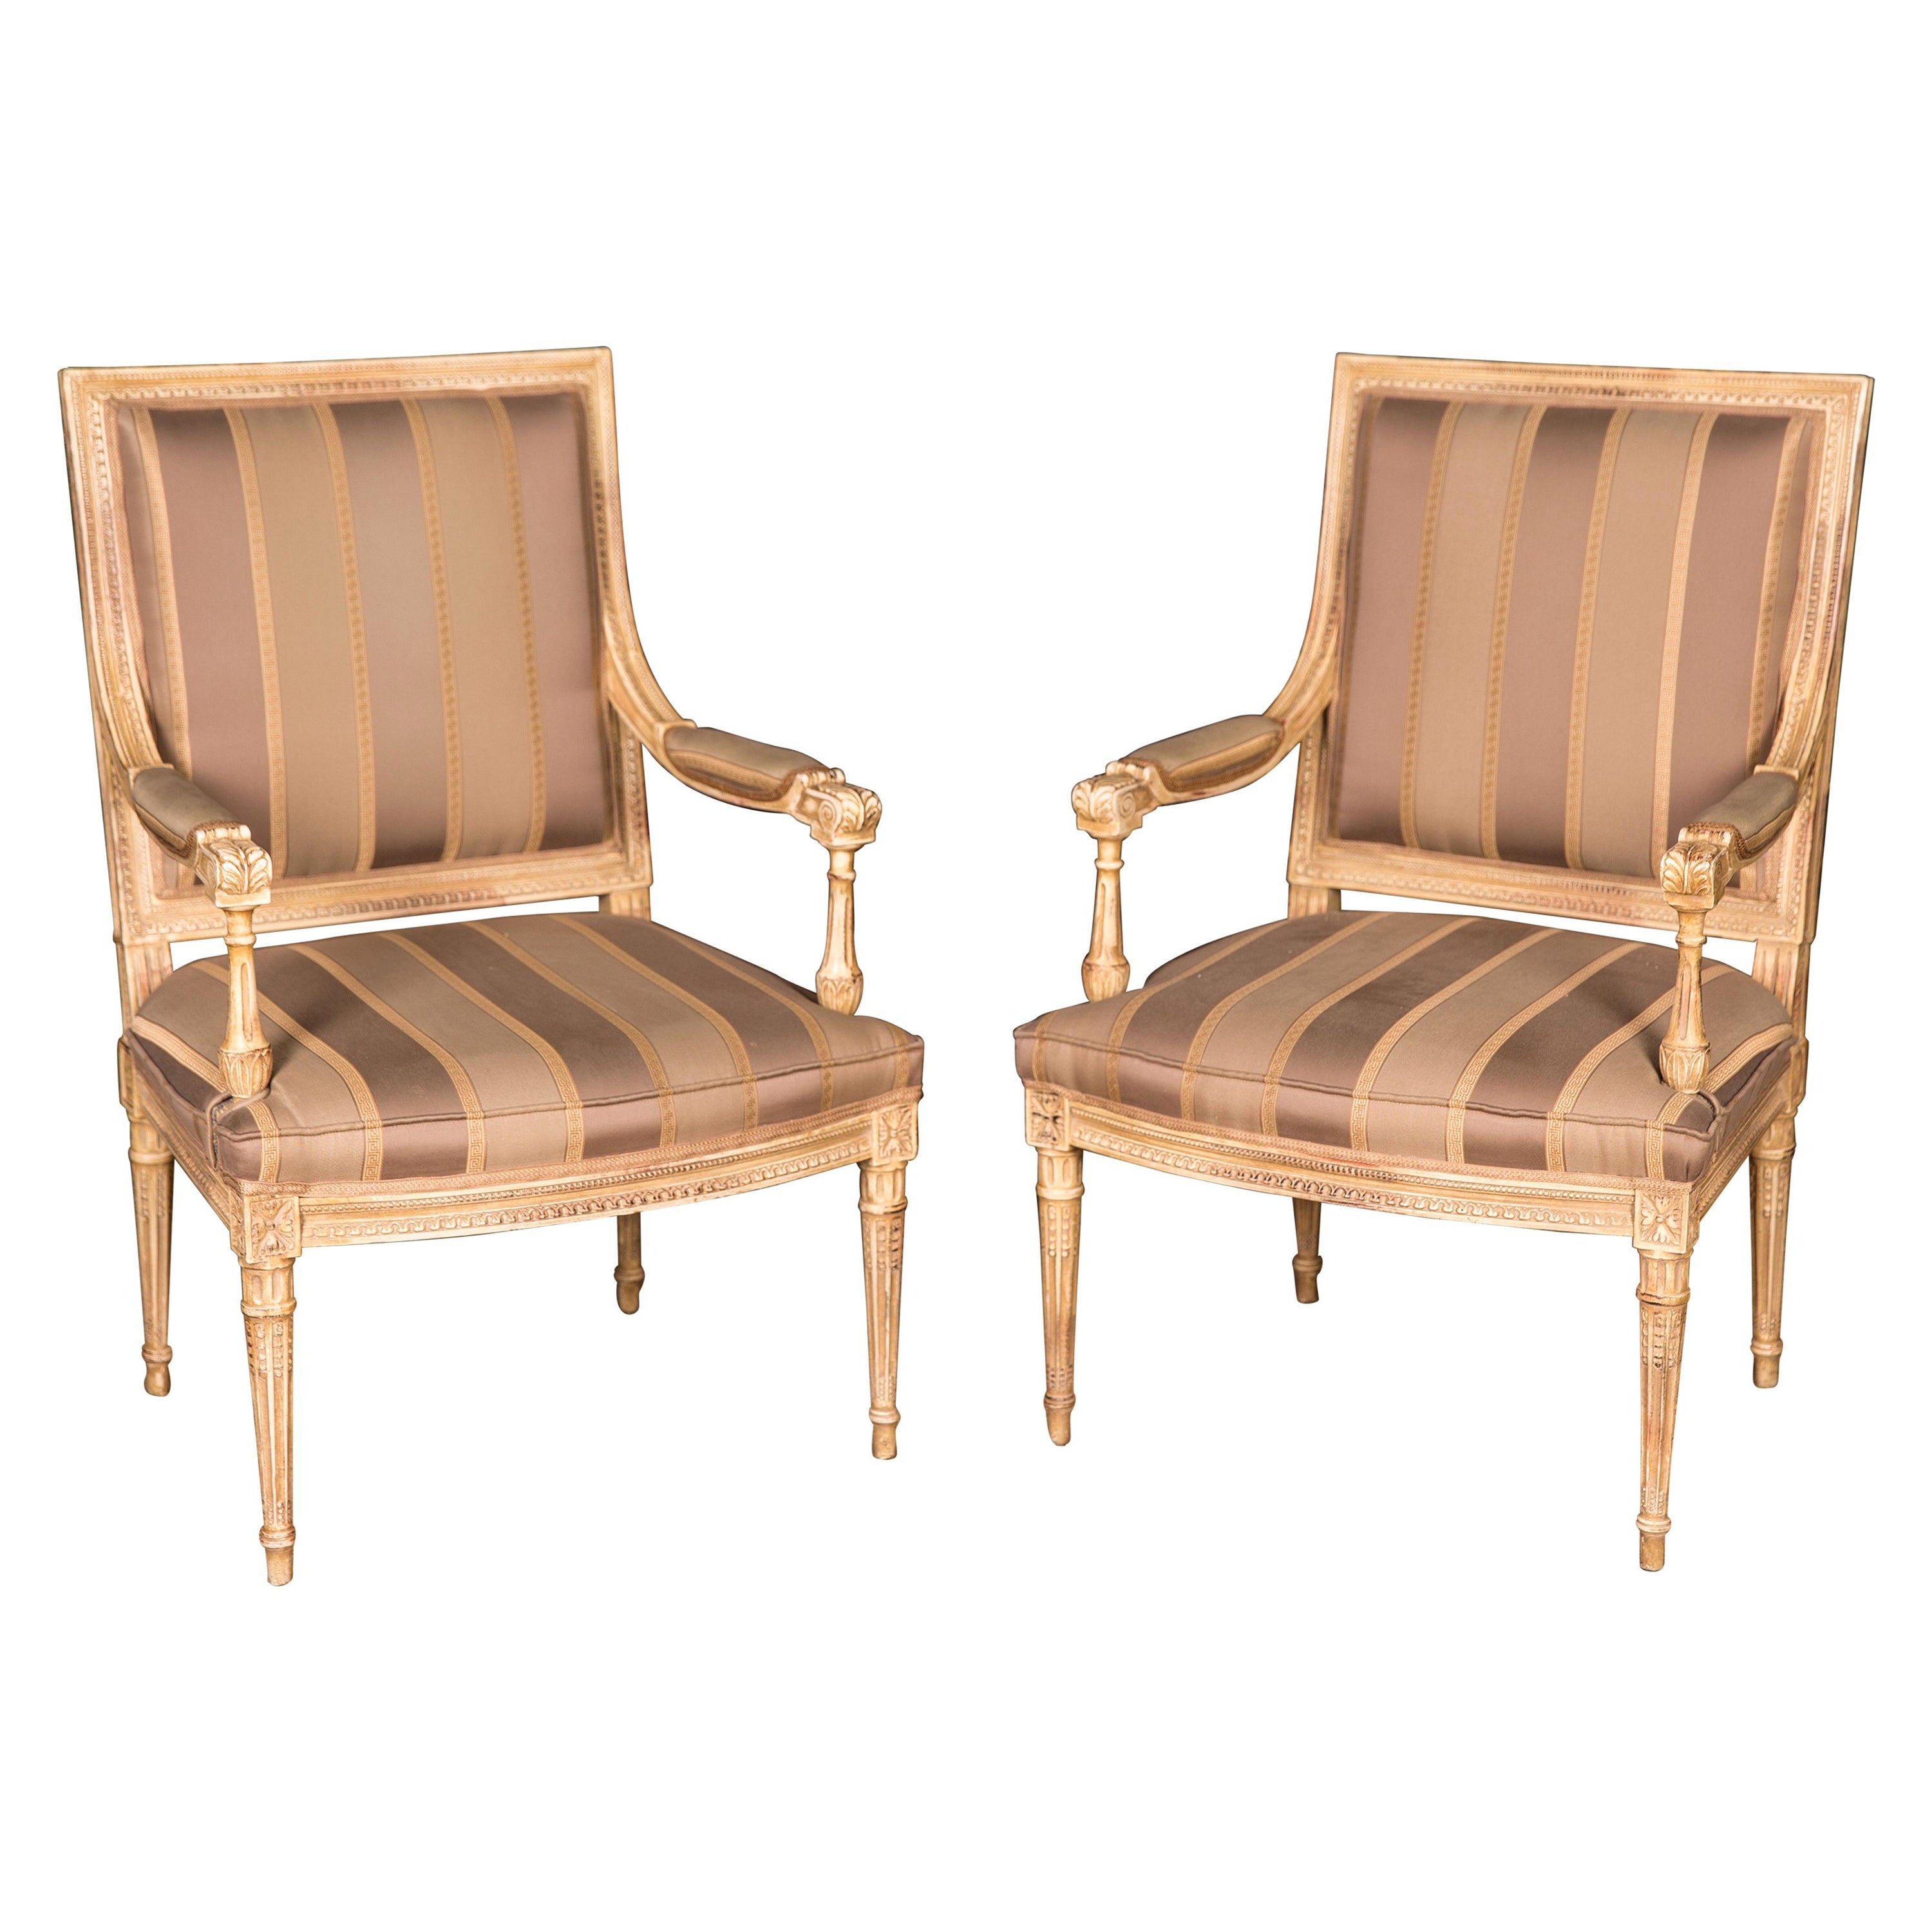 Two Elegant French Armchairs in the antique Louis Seize Style beech hand carved For Sale